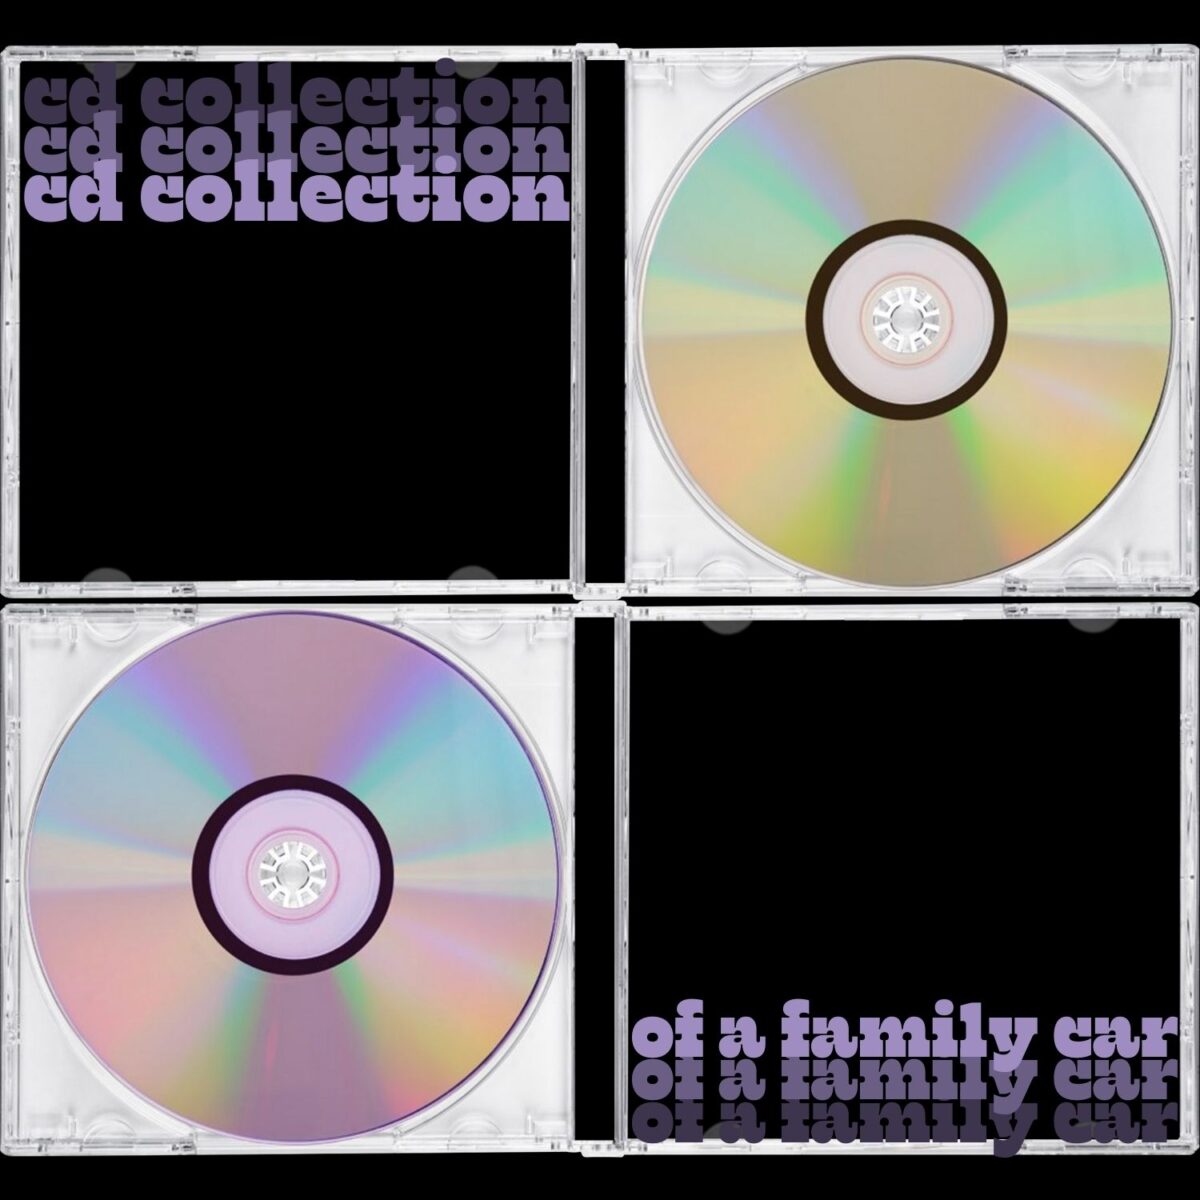 Two CD cases with cd's in them. Purple text in the top left that says "cd collection" three times, gradually getting lighter as it goes down. Text that says "of a family car" that is purple and gradually get's darker as it goes down.